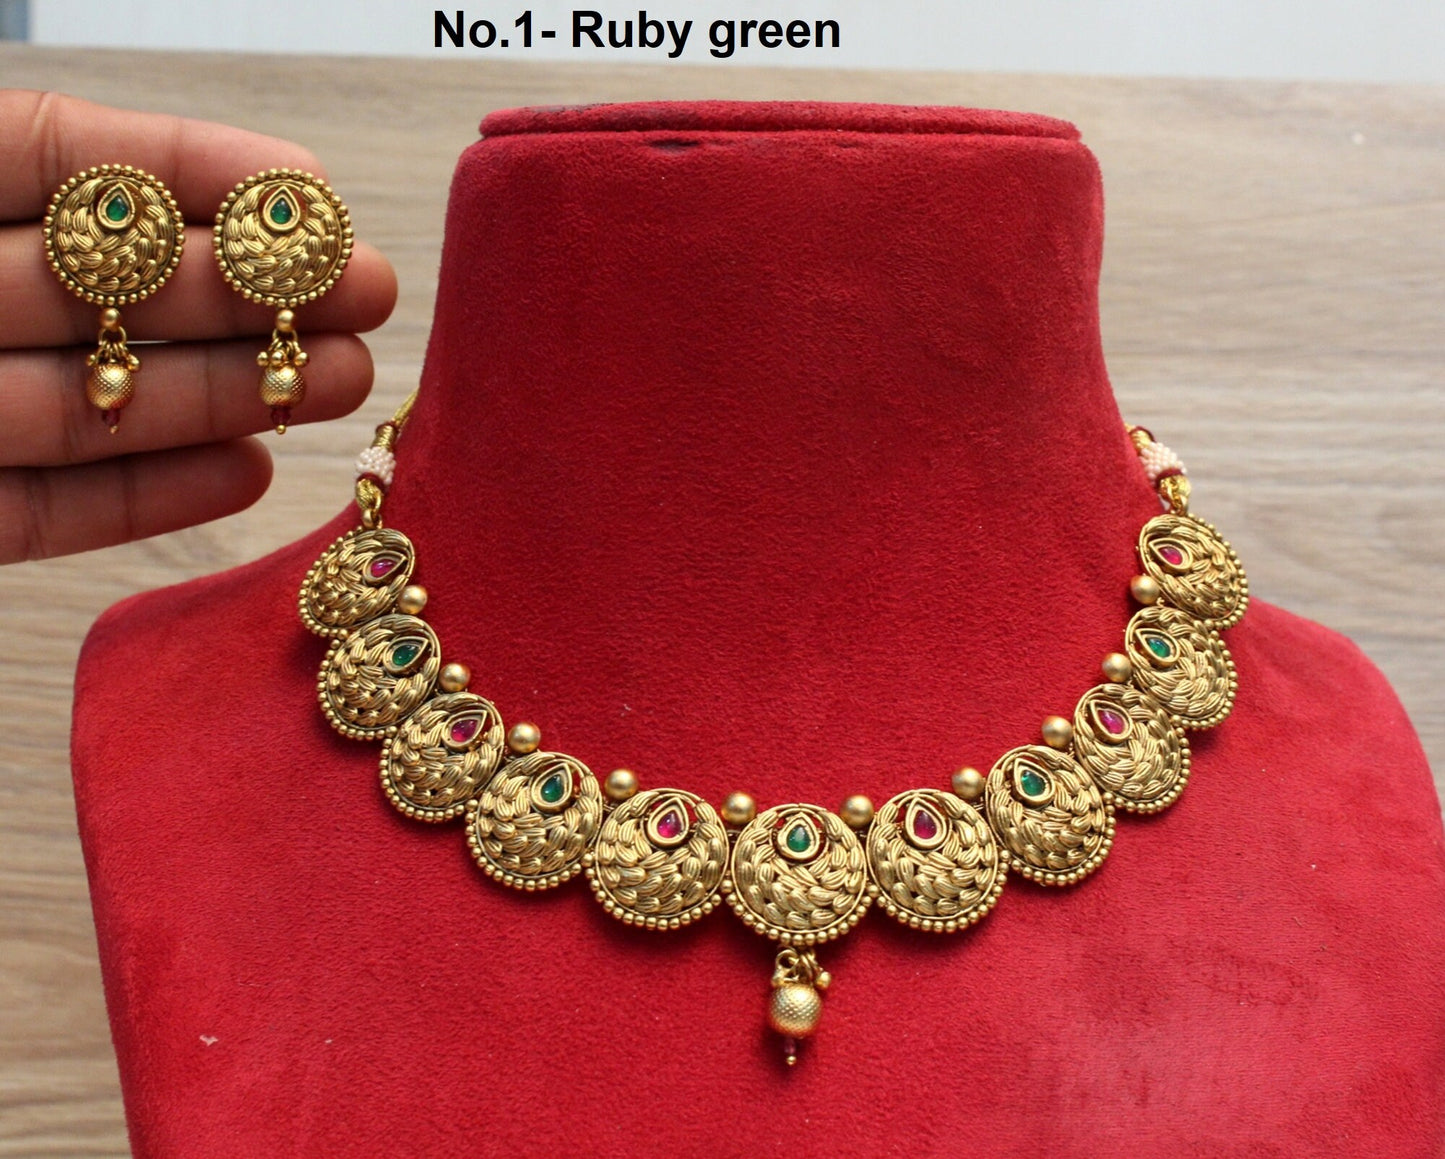 Indian Gold   Jewellery necklace set/Ruby green mat finish necklace Set Bollywood Style Gold Finish South Indian bridal Jewellery